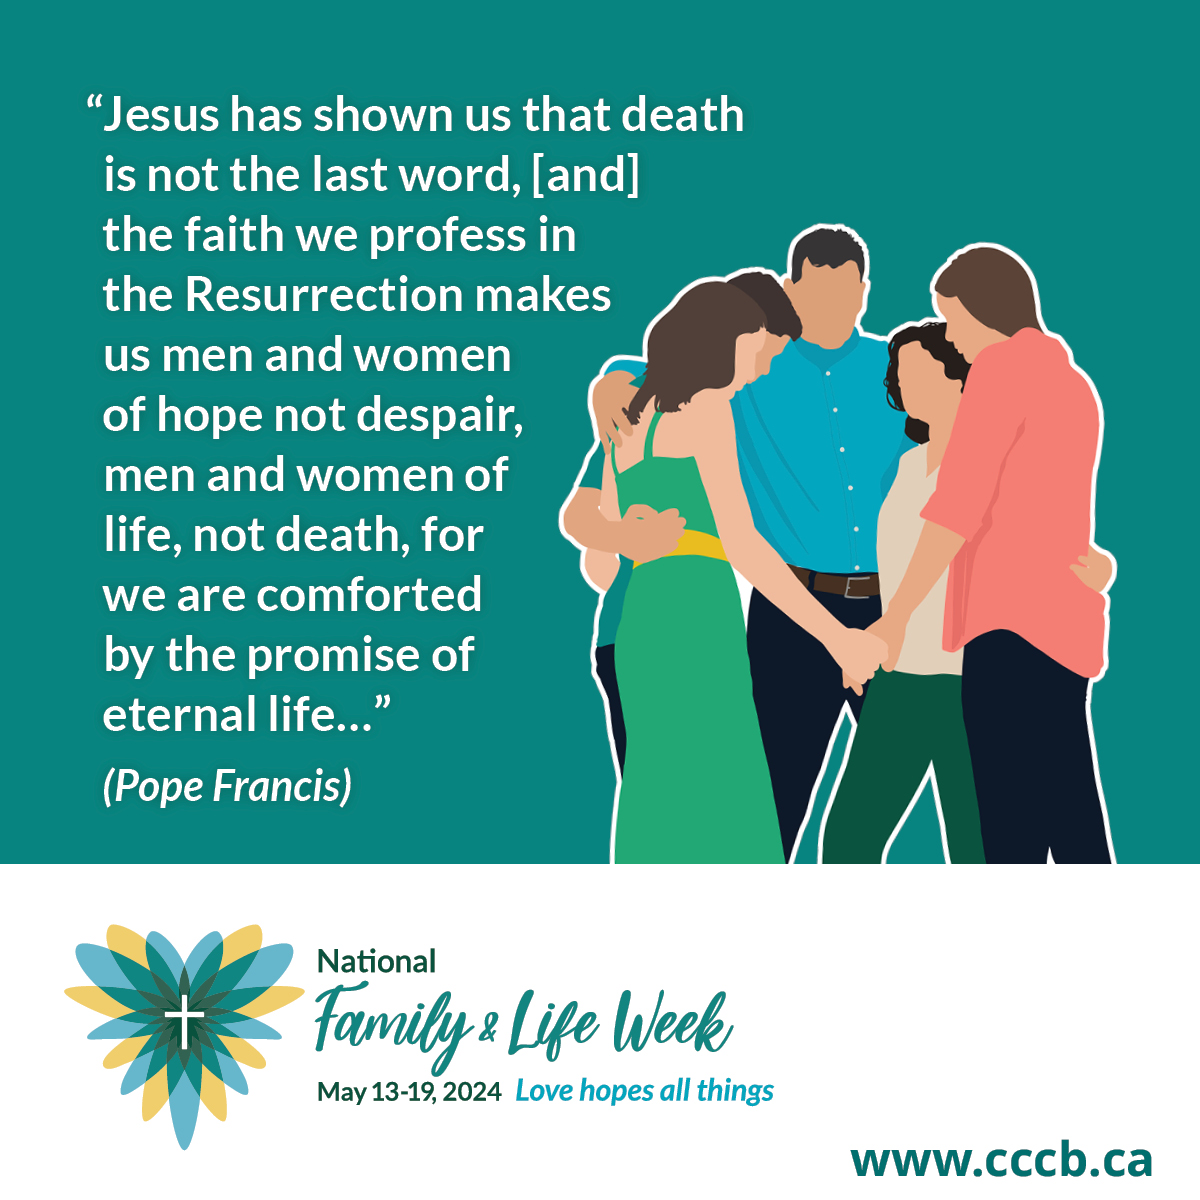 On this fifth day of National Family and Life Week, we pray for those grieving the loss of a loved one: Lord, come and remind them that the grain that dies bears much fruit, and that our death is not the end of life, but the beginning of a new and eternal life with you. #NFLW2024